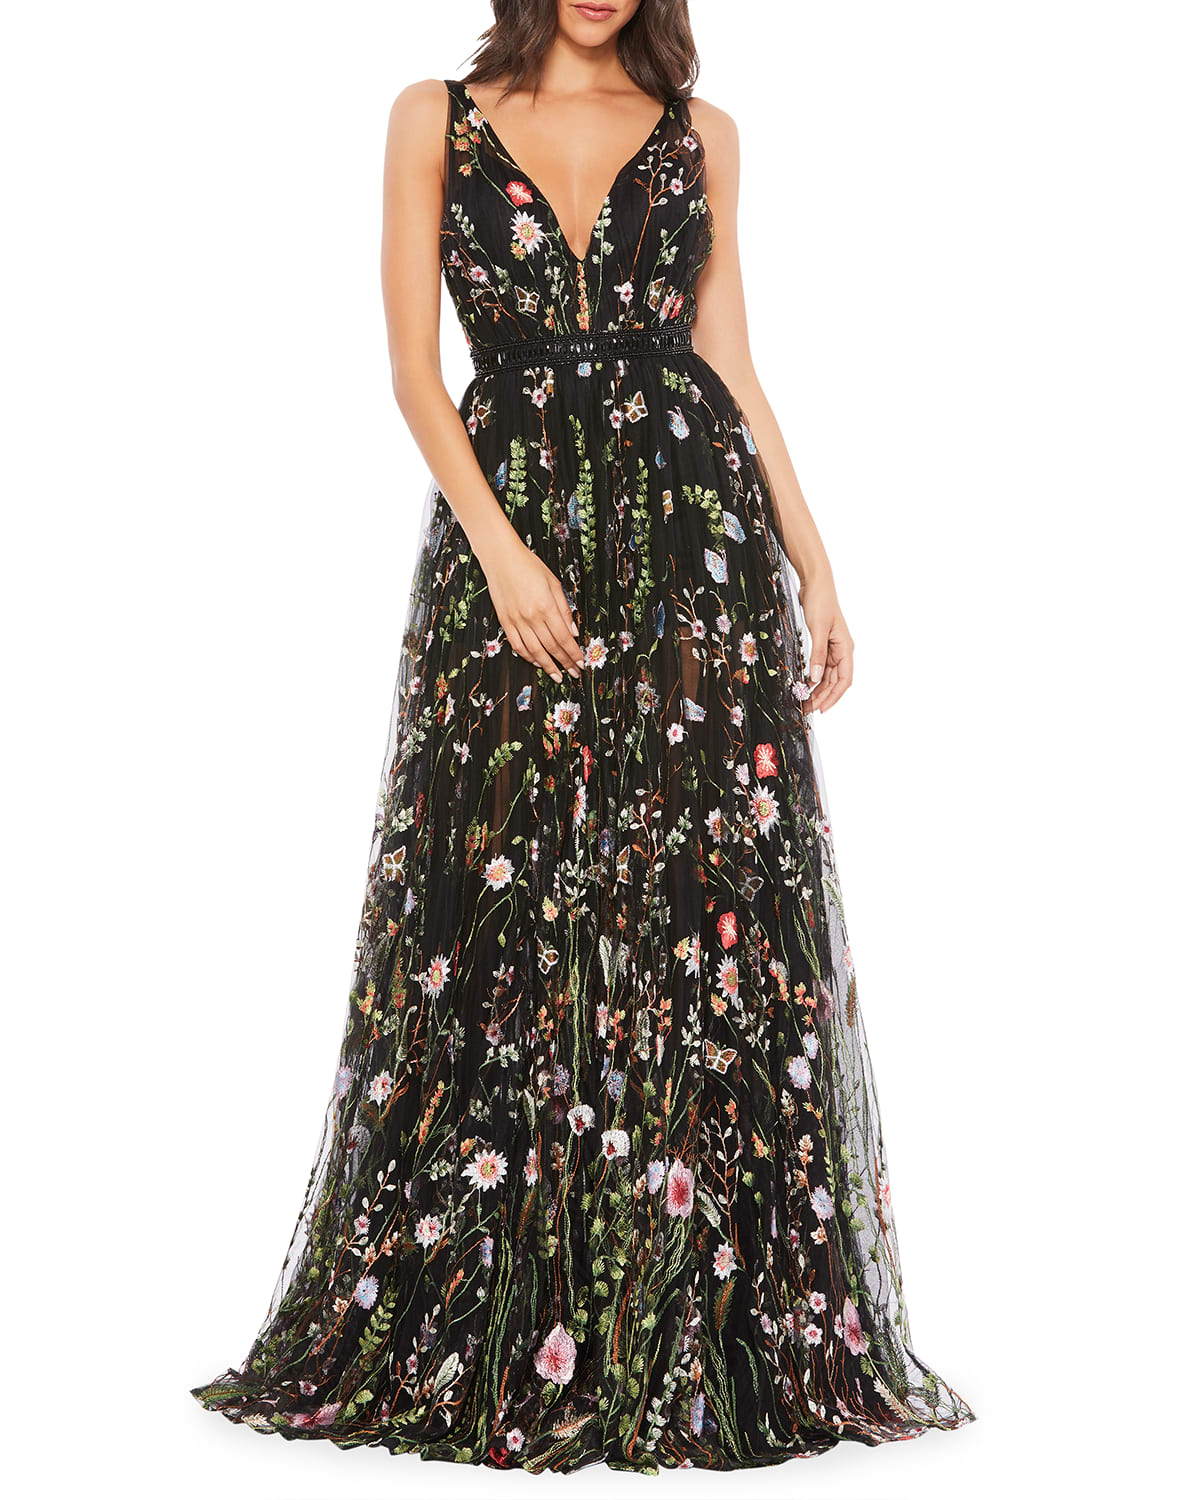 Mac Duggal Floral Embellished One-Shoulder Illusion Sleeve Tulle Gown